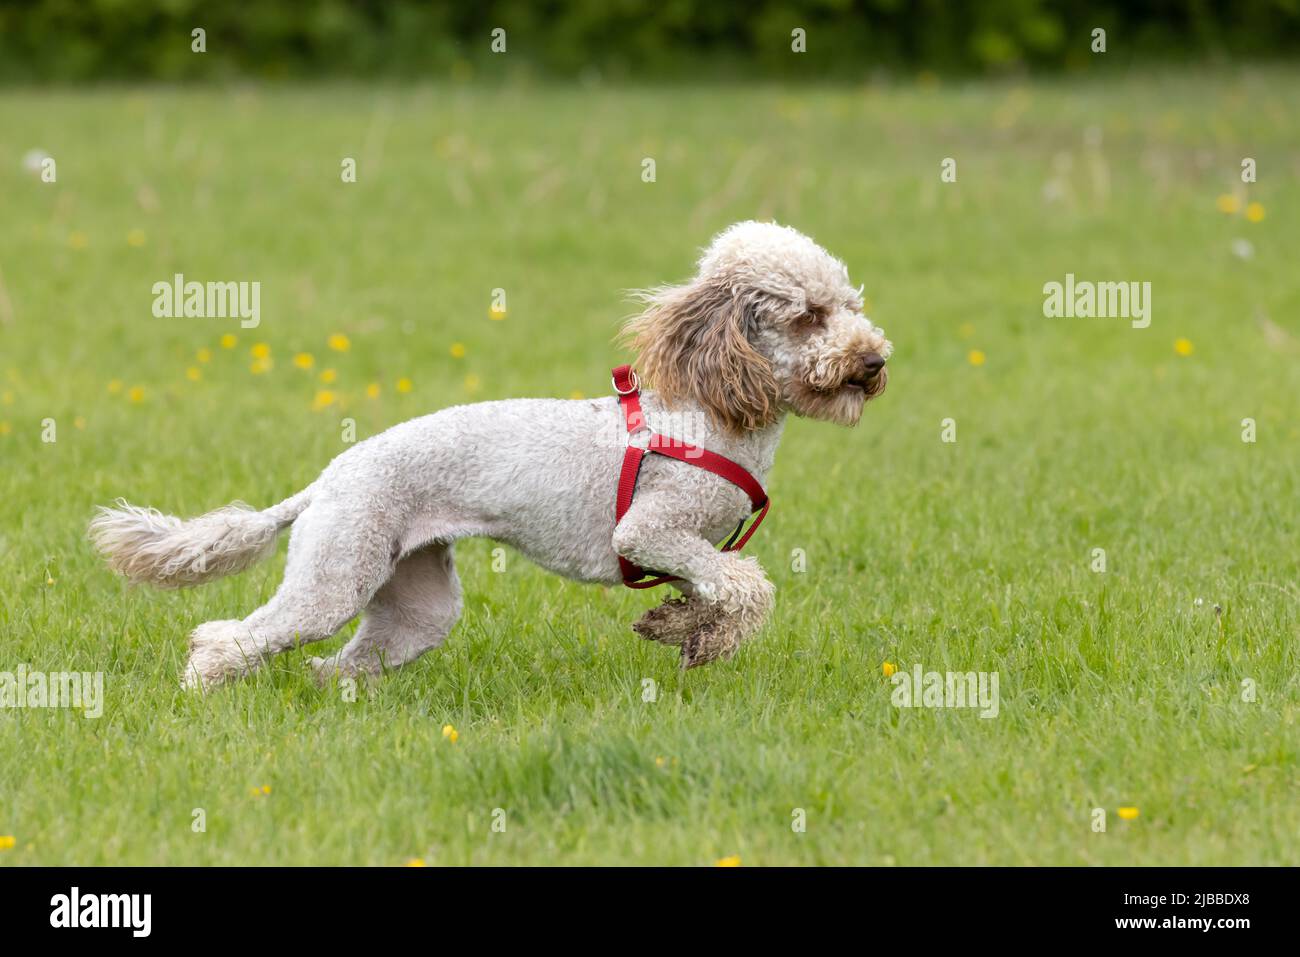 Side view of cute small light brown trimmed poodle with red harness running on grass Stock Photo